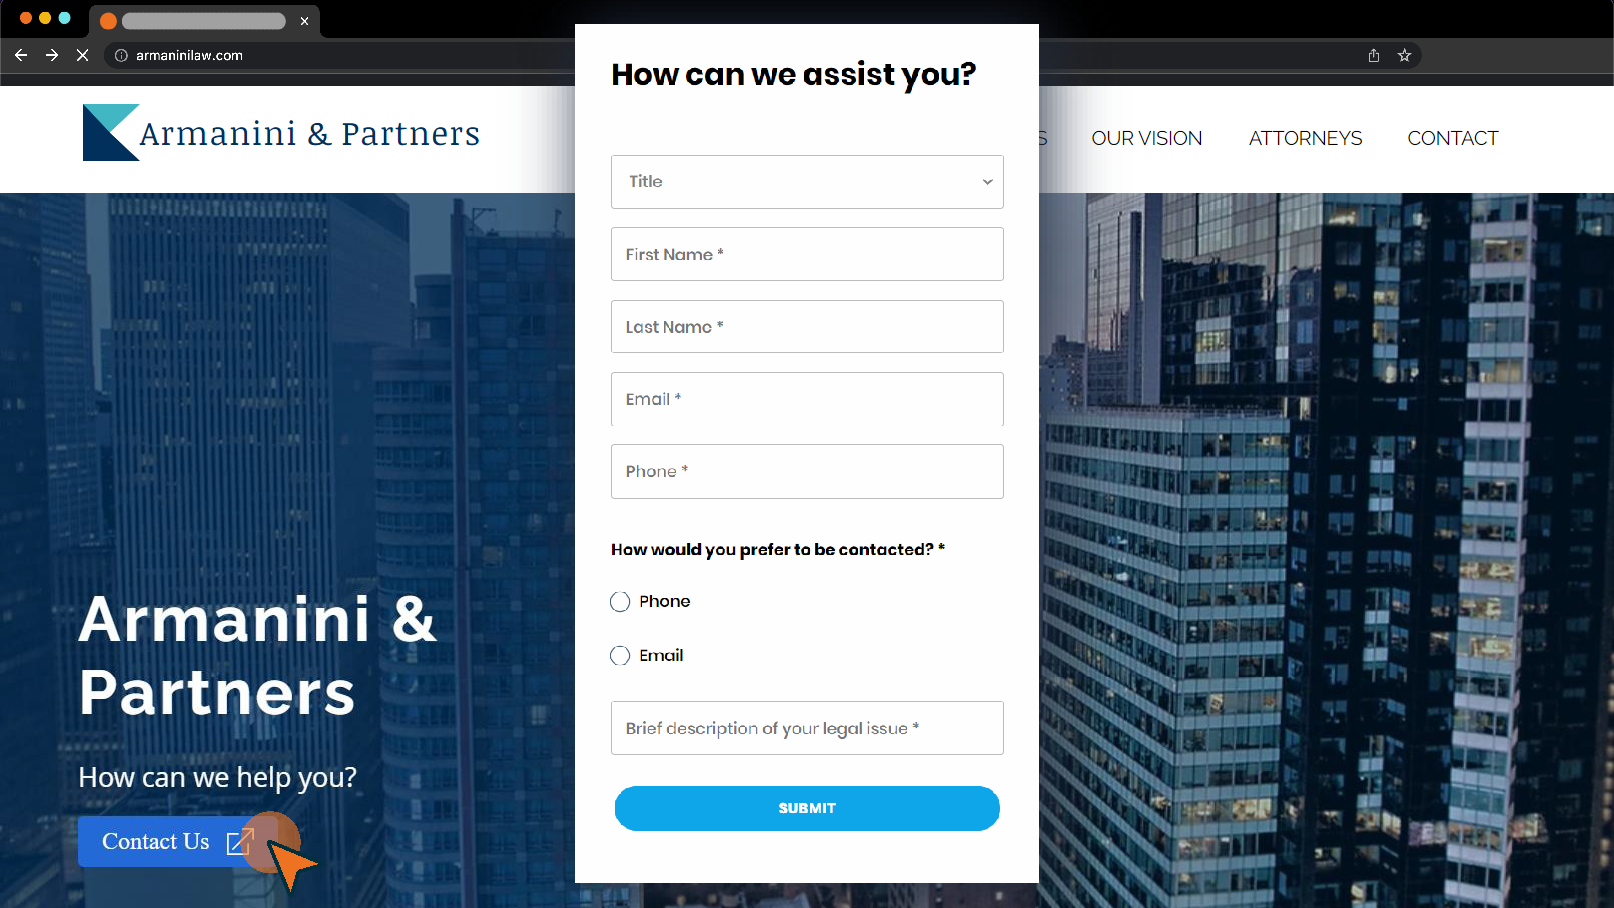 Smokeball to Expand Its Law Practice Management Platform With Addition Of Client Intake Feature